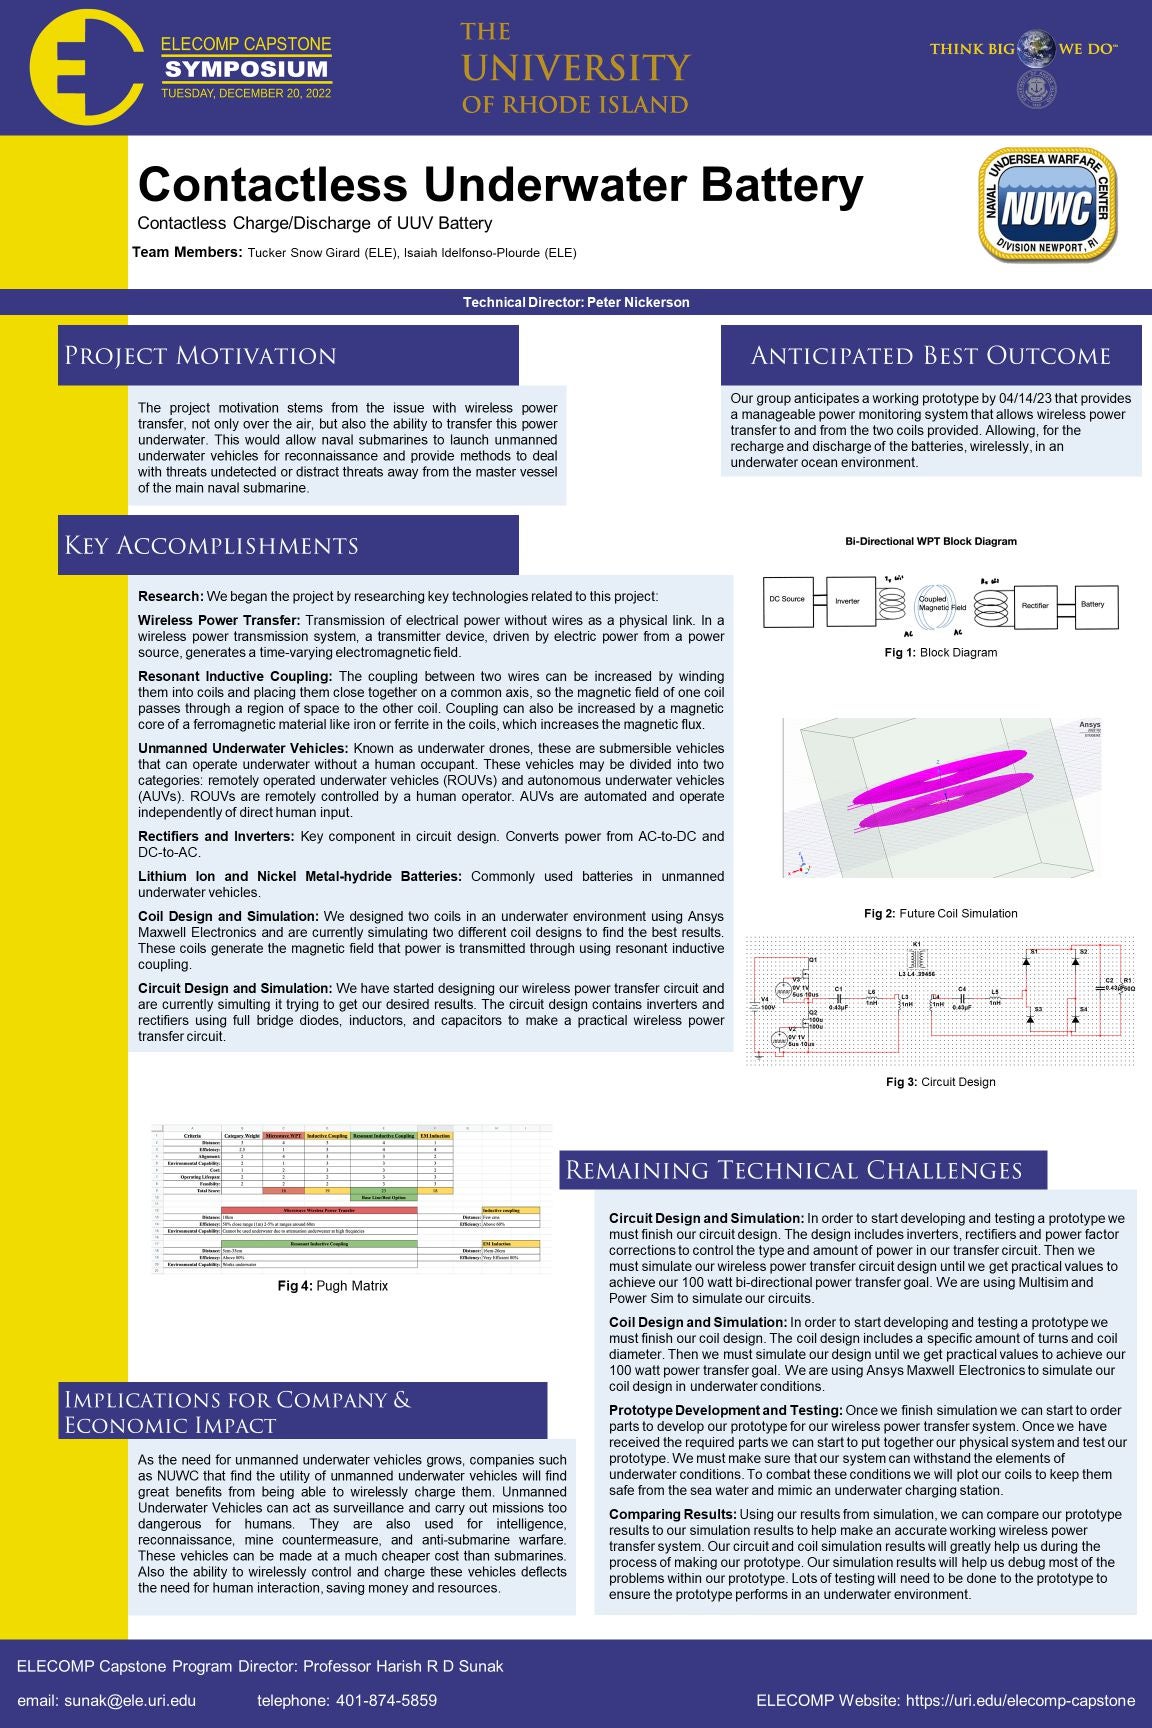 NUWC-Contactless-Symposium-Poster-2022-2023